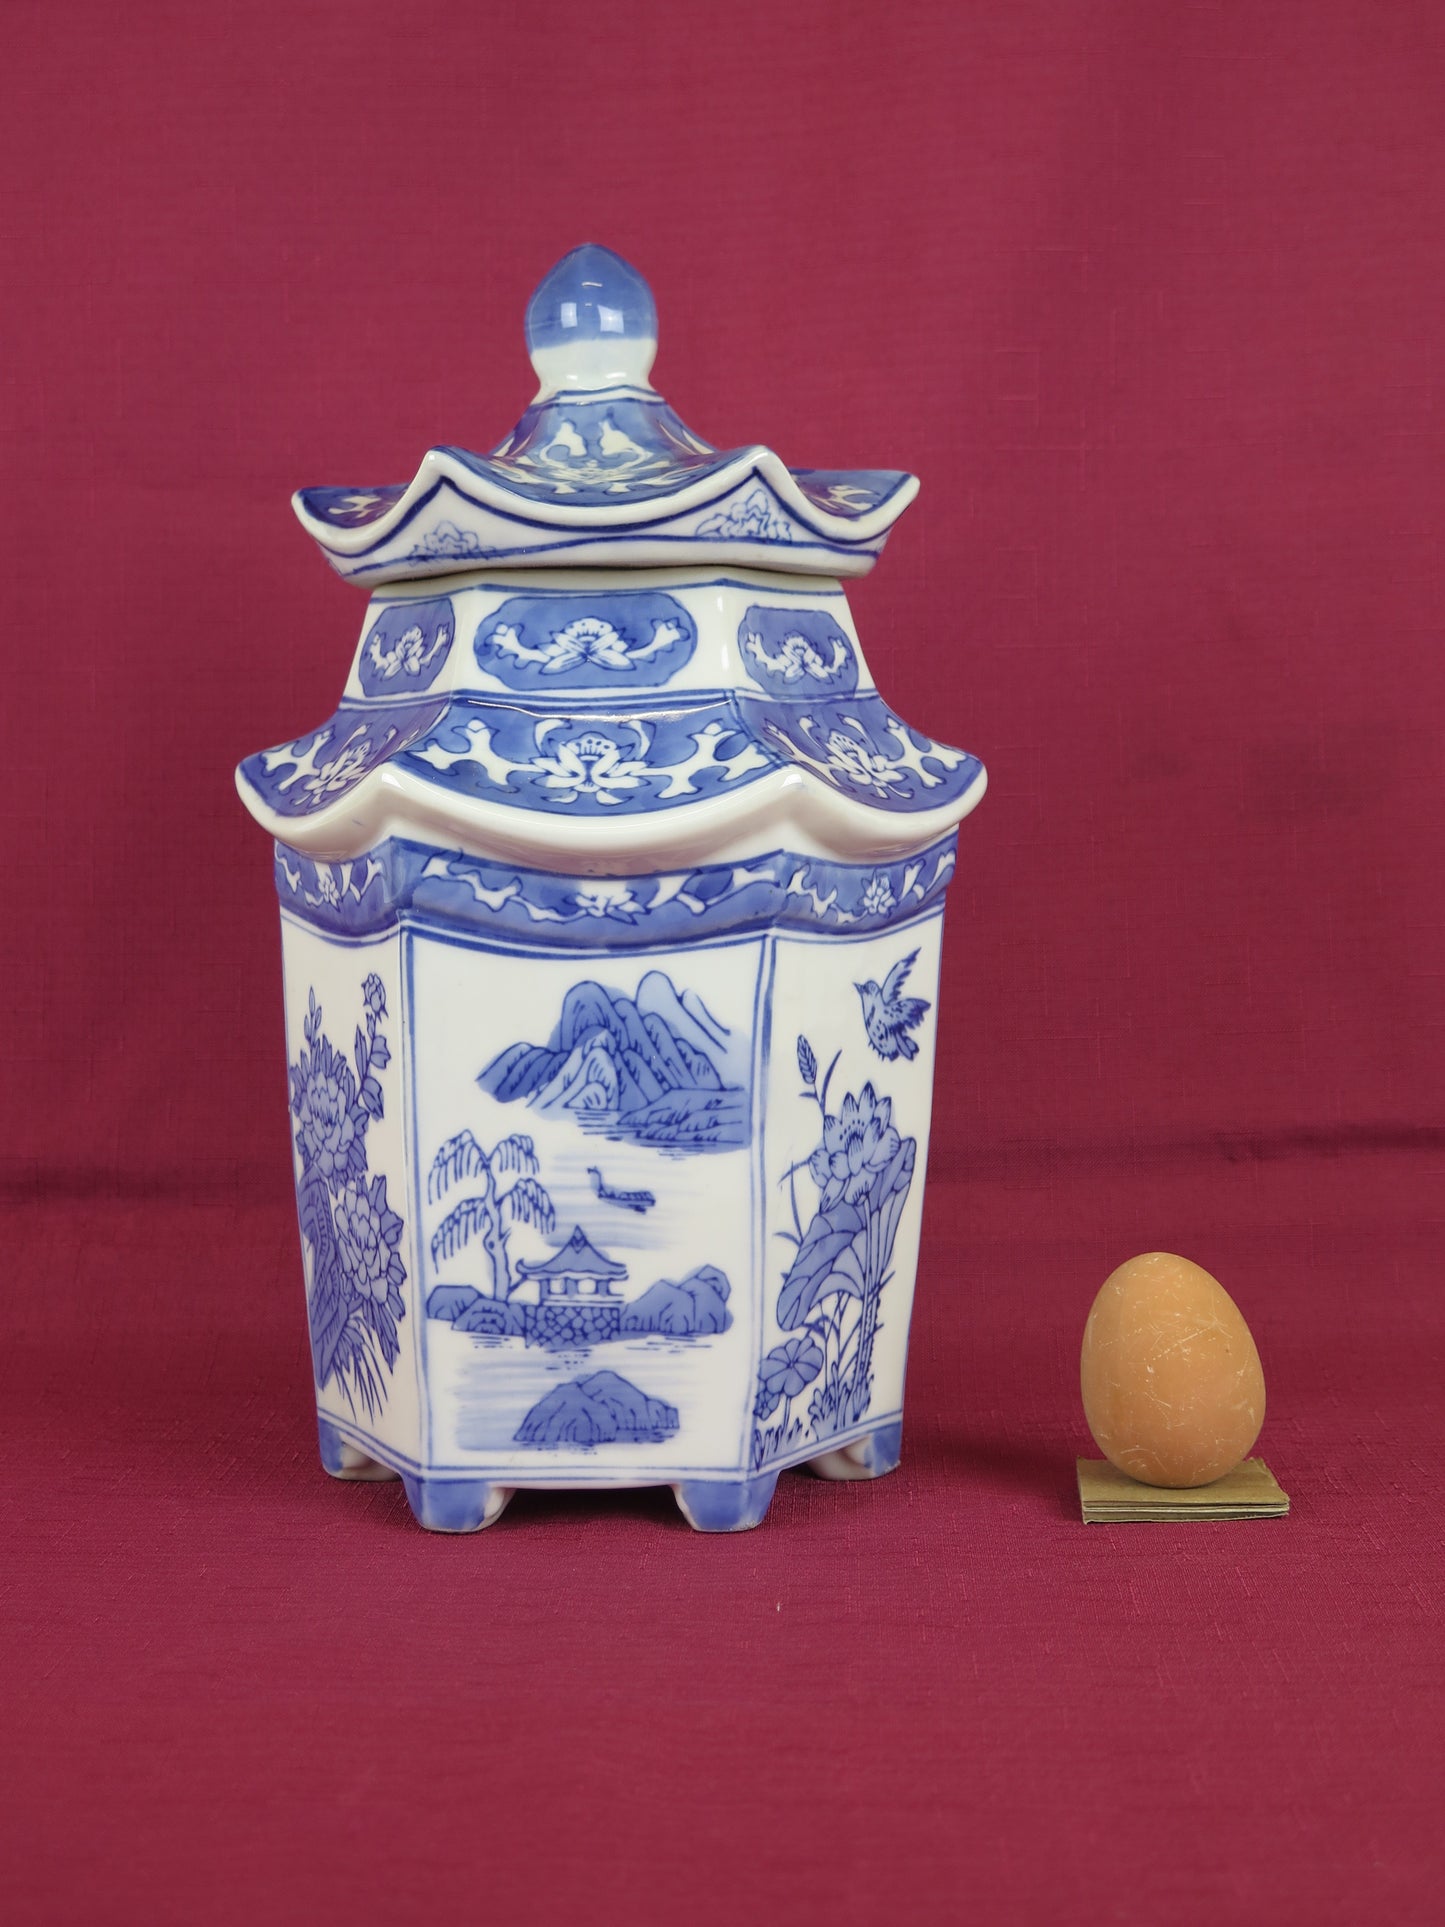 Vintage Chinese collectible ceramic vase china white blue hand painted CM4